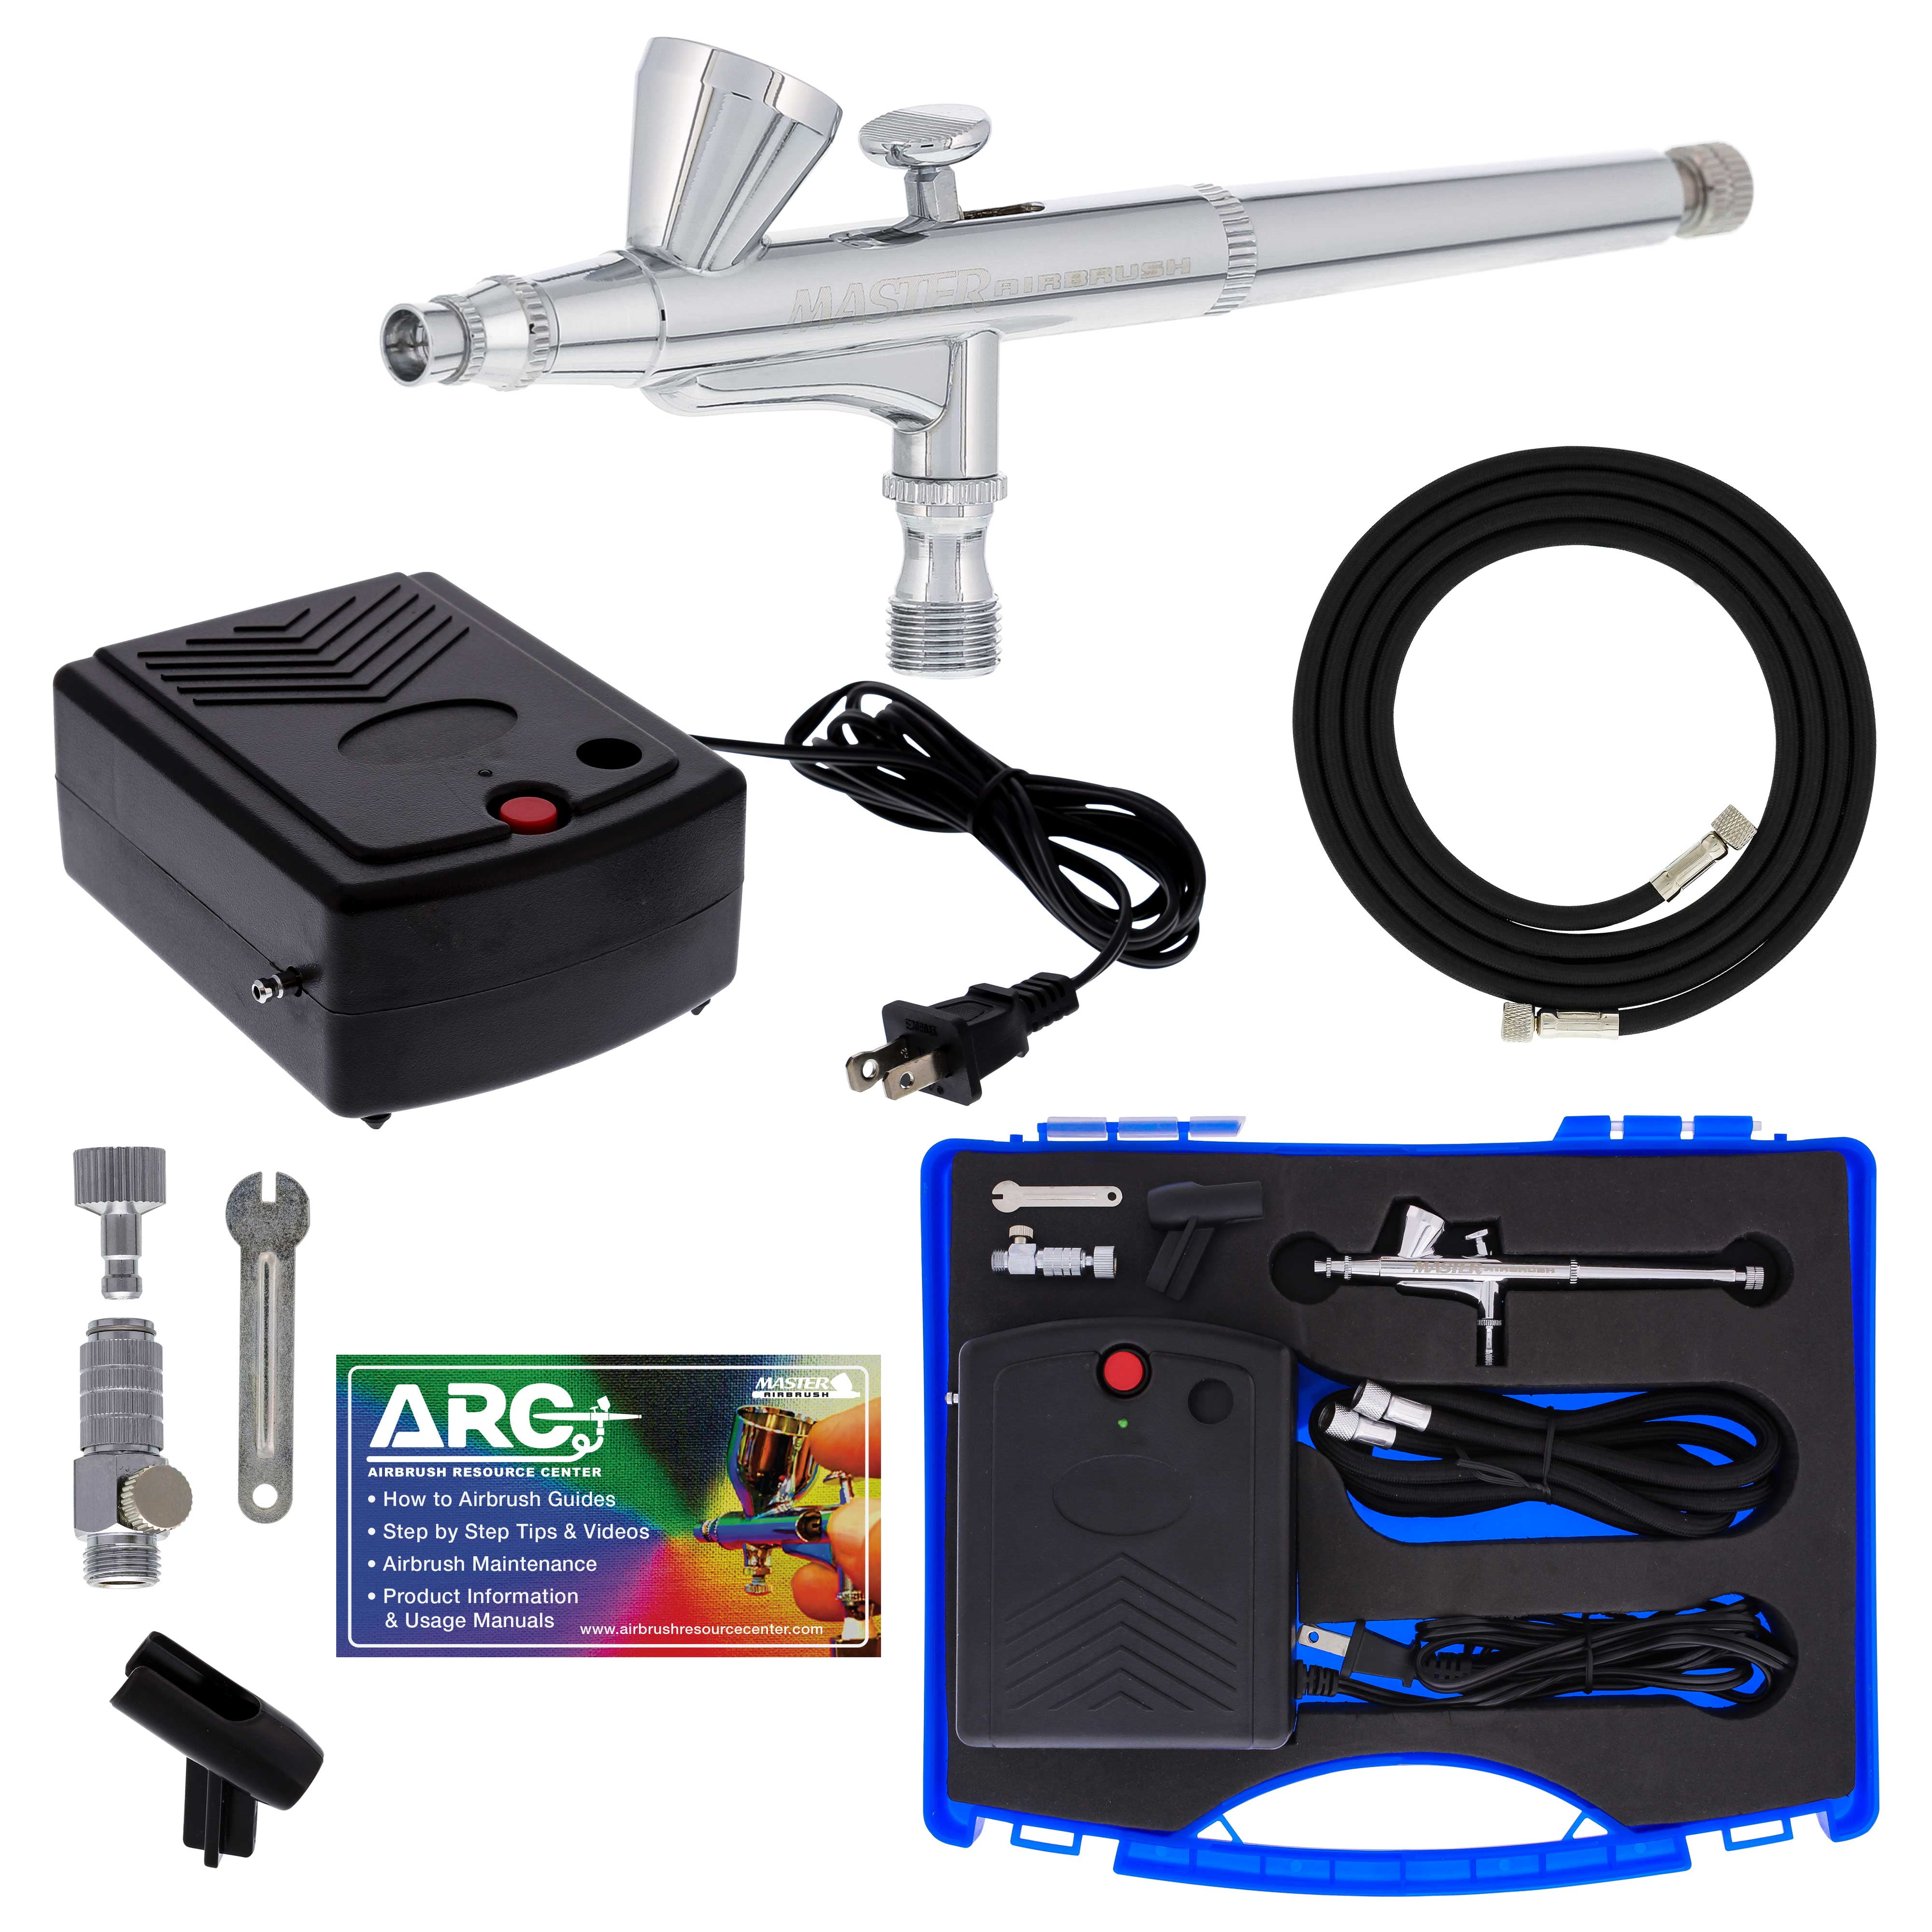  Iwata Eclipse HP CS Airbrush Set with 1/5 hp Cool Runner II  Dual Fan Air Tank Compressor System Kit, Professional All-Purpose  Dual-Action Gravity Feed Airbrush, 0.35mm tip, Hose, Holder, How-To Guide 